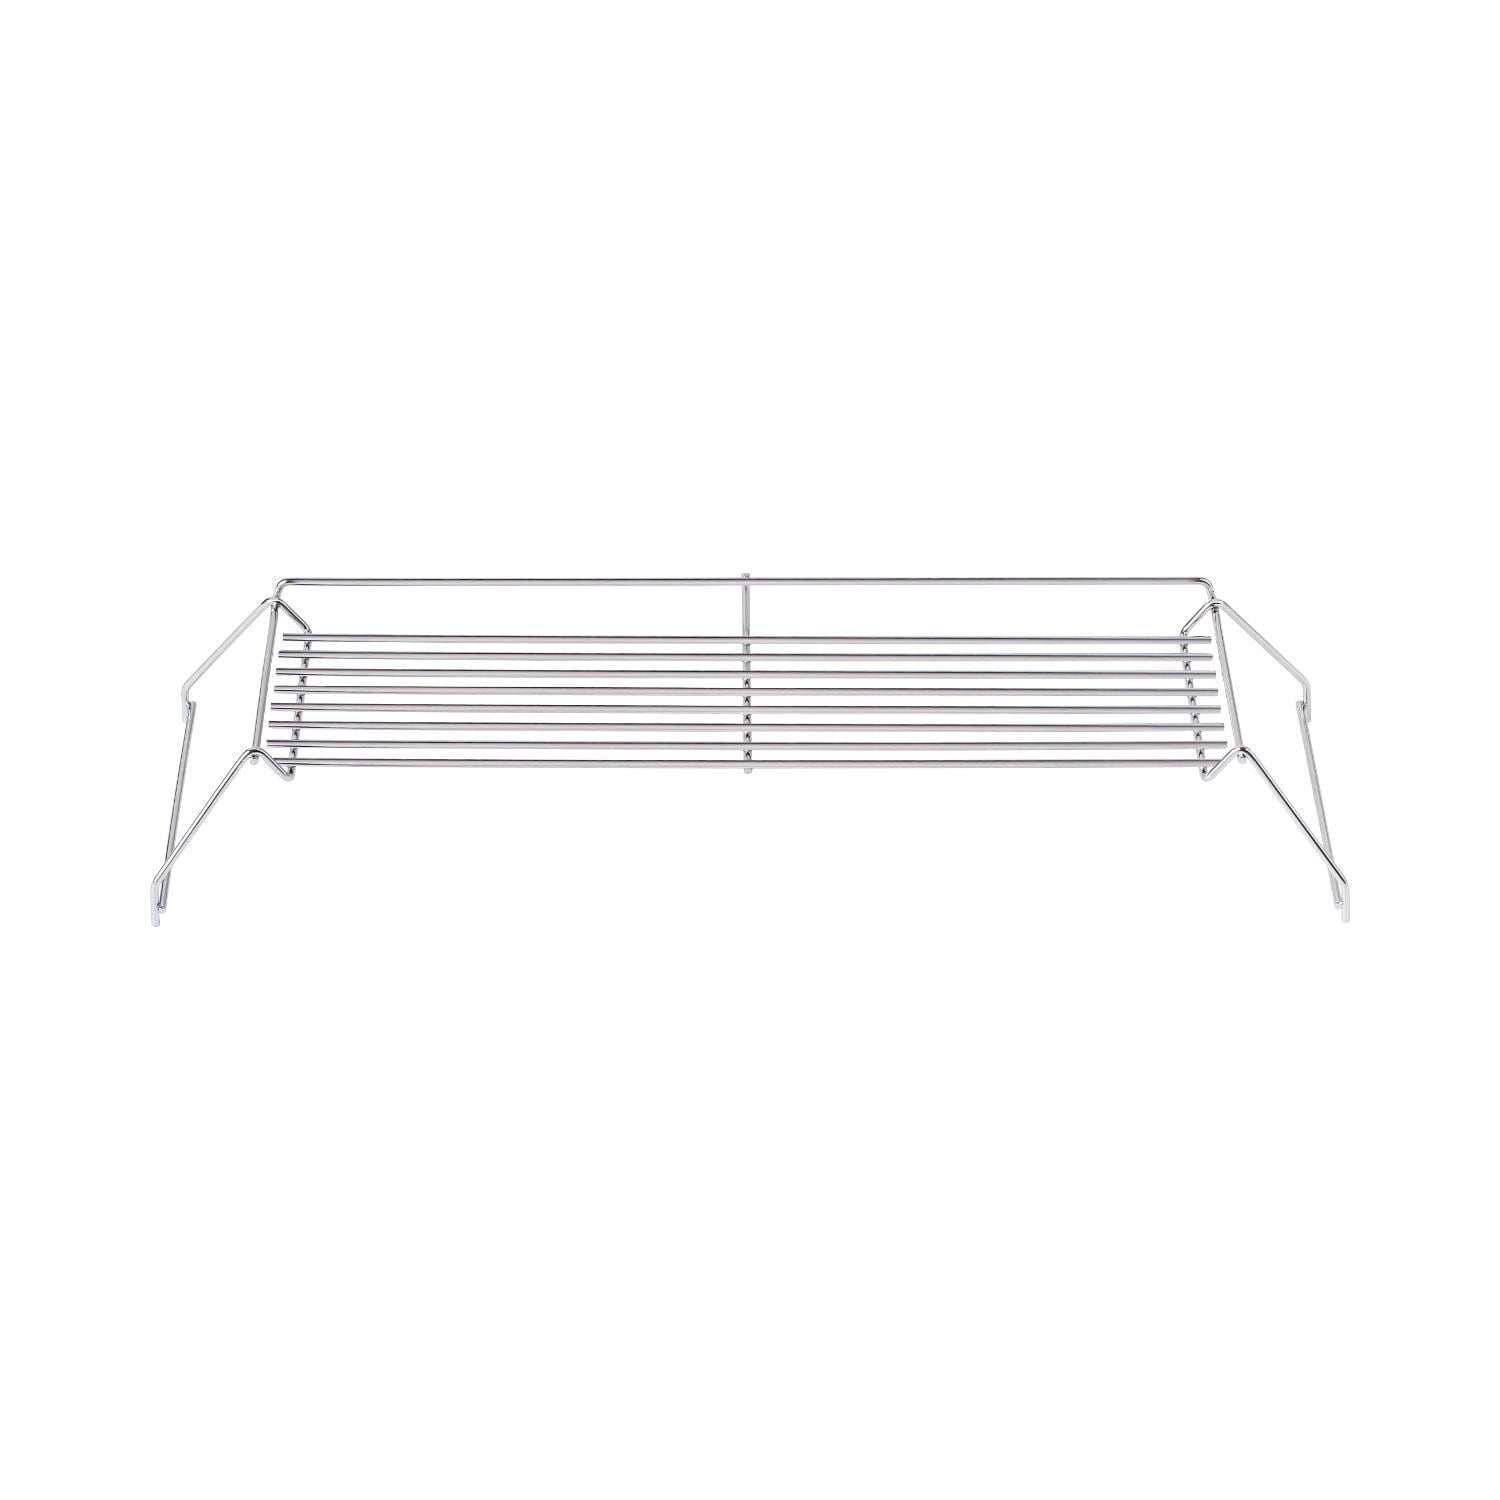 Everdure By Heston Blumenthal Warming Rack For FORCE 48-Inch Or FURNACE 52-Inch Propane Grills - HBWARMR